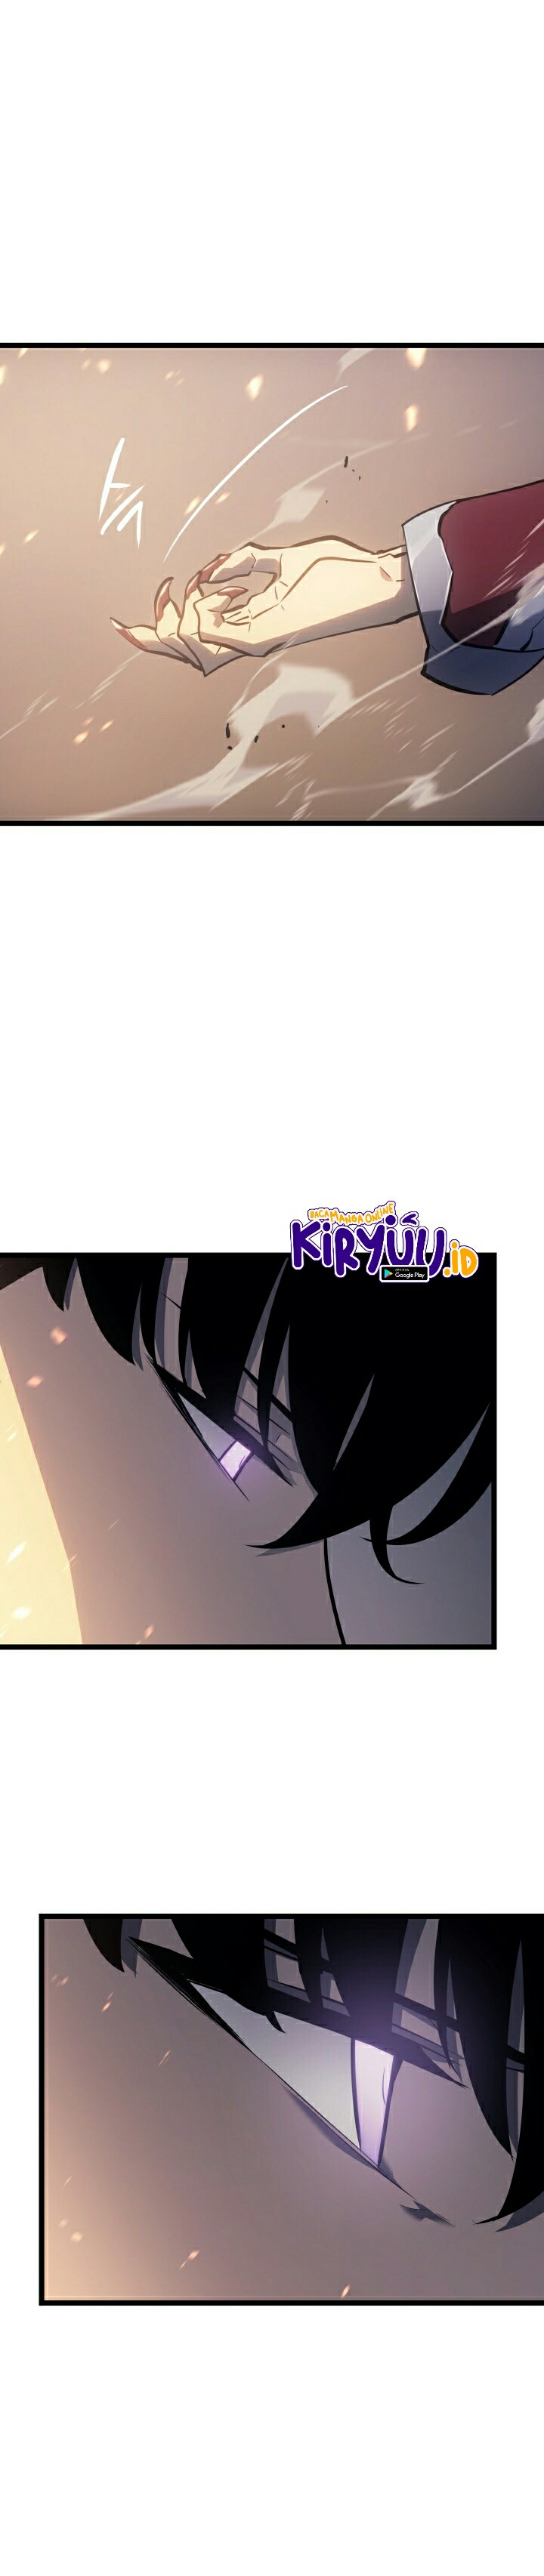 Solo Leveling Chapter 174 Image 39